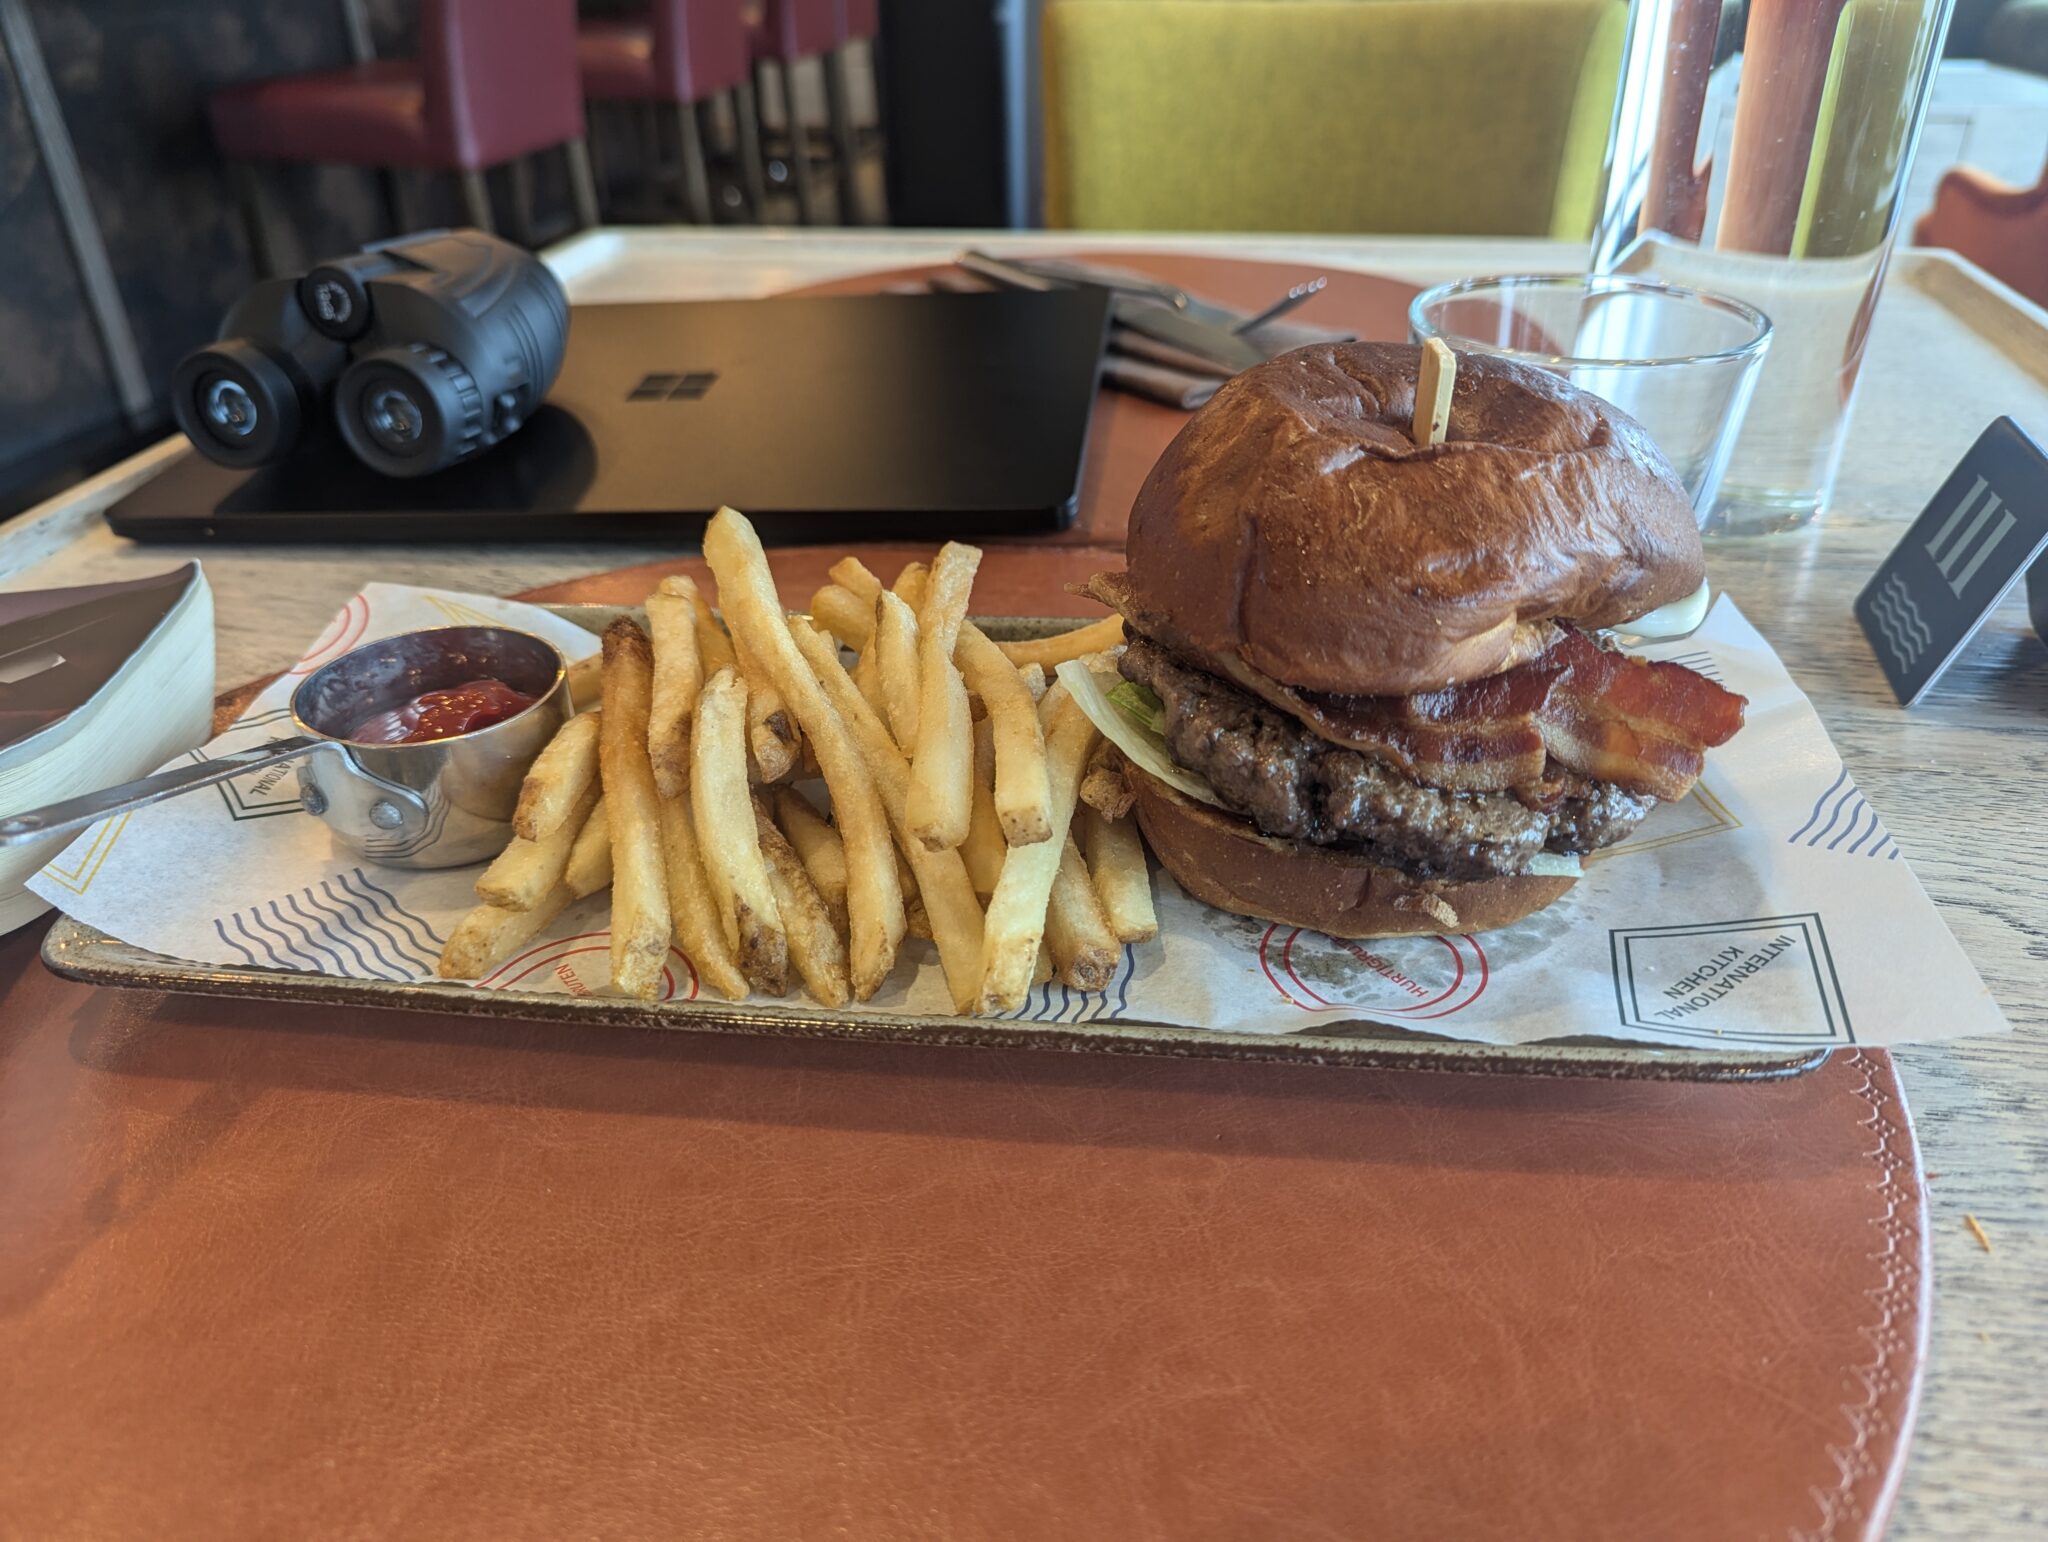 a burger and fries on a tray